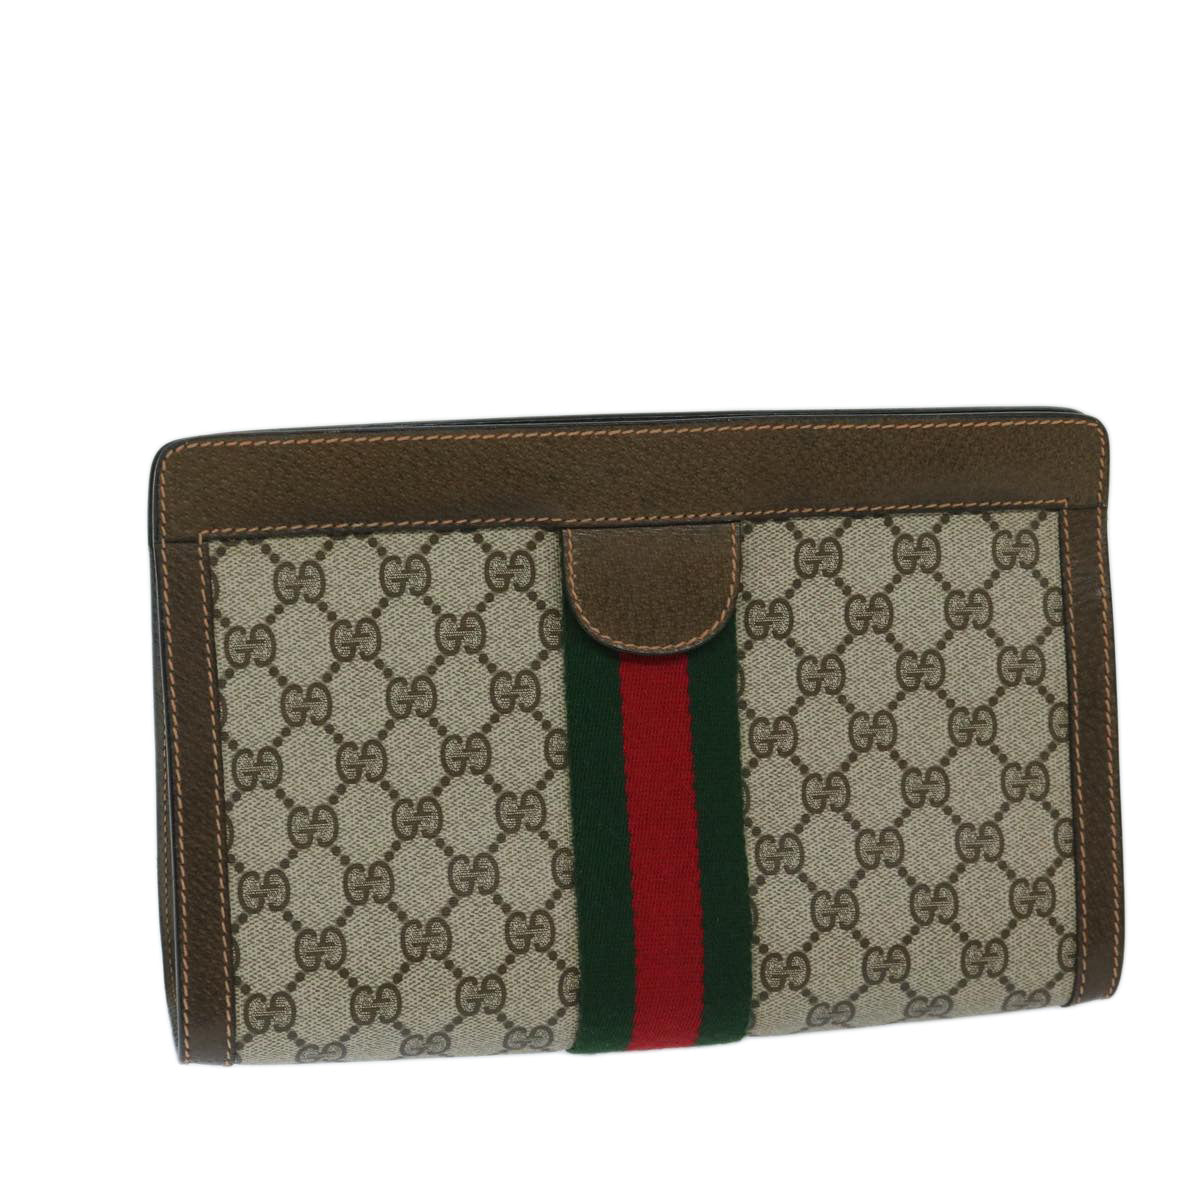 GUCCI GG Canvas Web Sherry Line Clutch Bag PVC Beige Green Red Auth yk11340